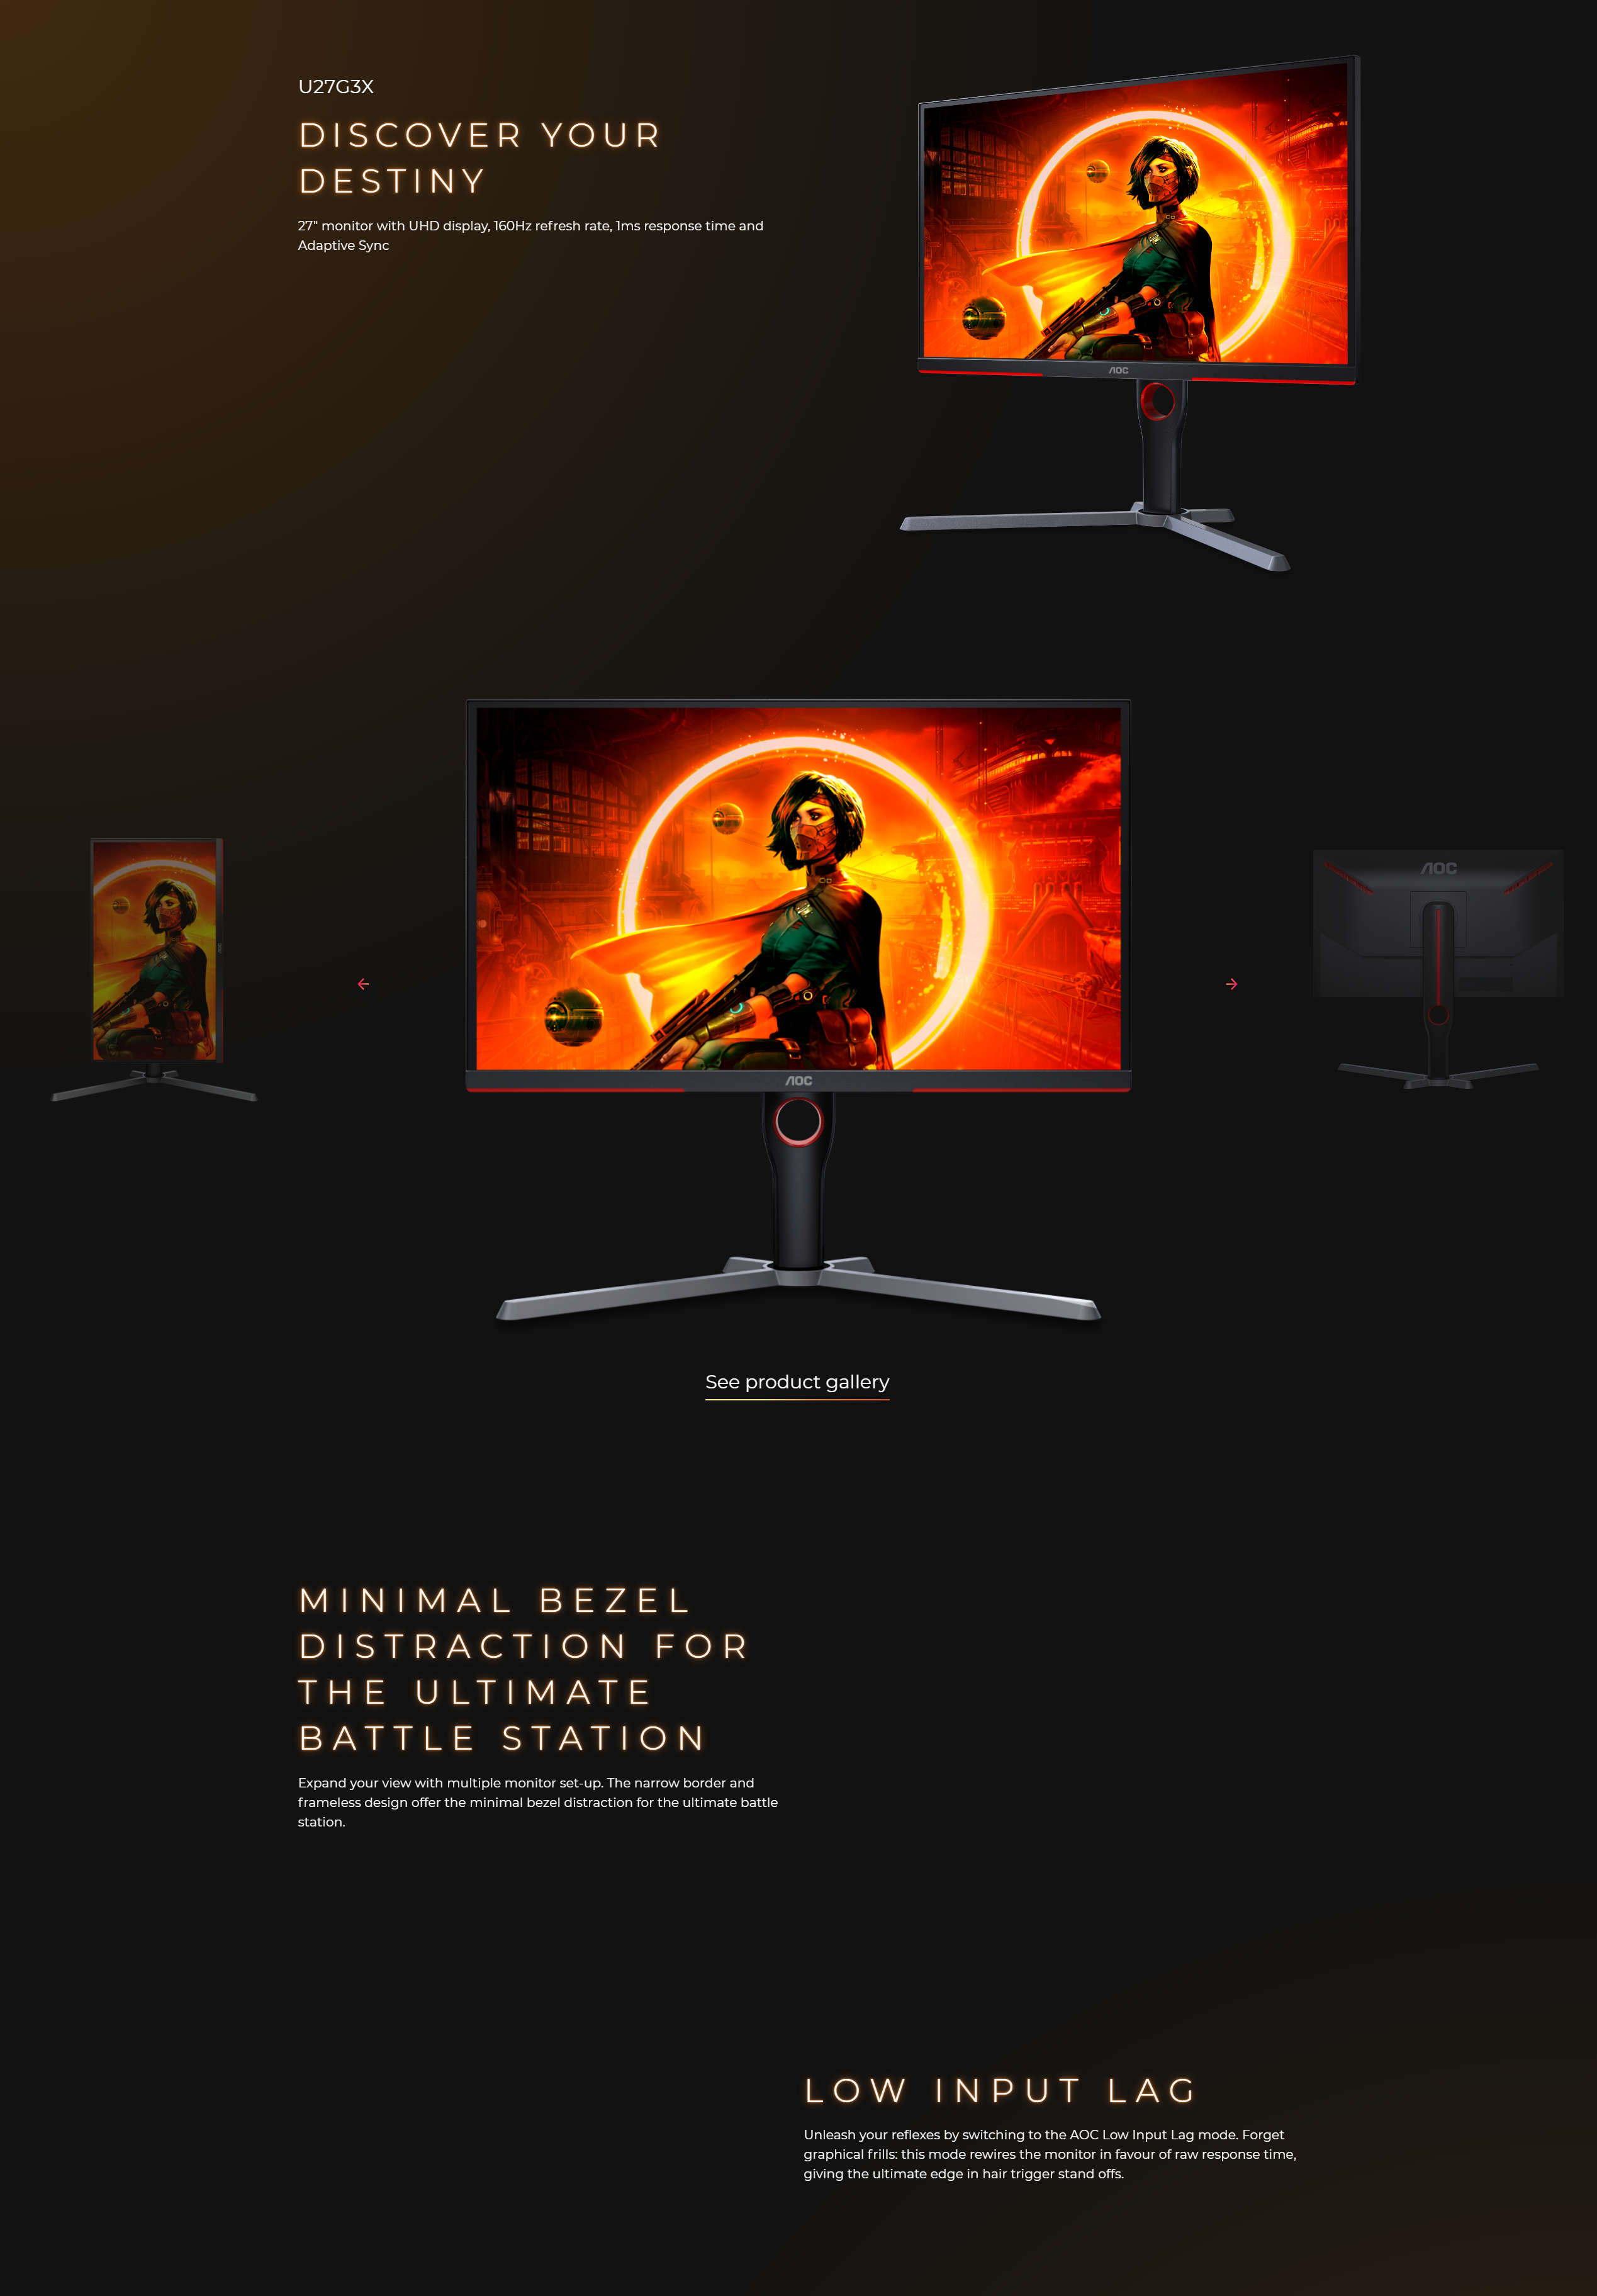 A large marketing image providing additional information about the product AOC Gaming U27G3X 27" UHD 160Hz IPS Monitor - Additional alt info not provided